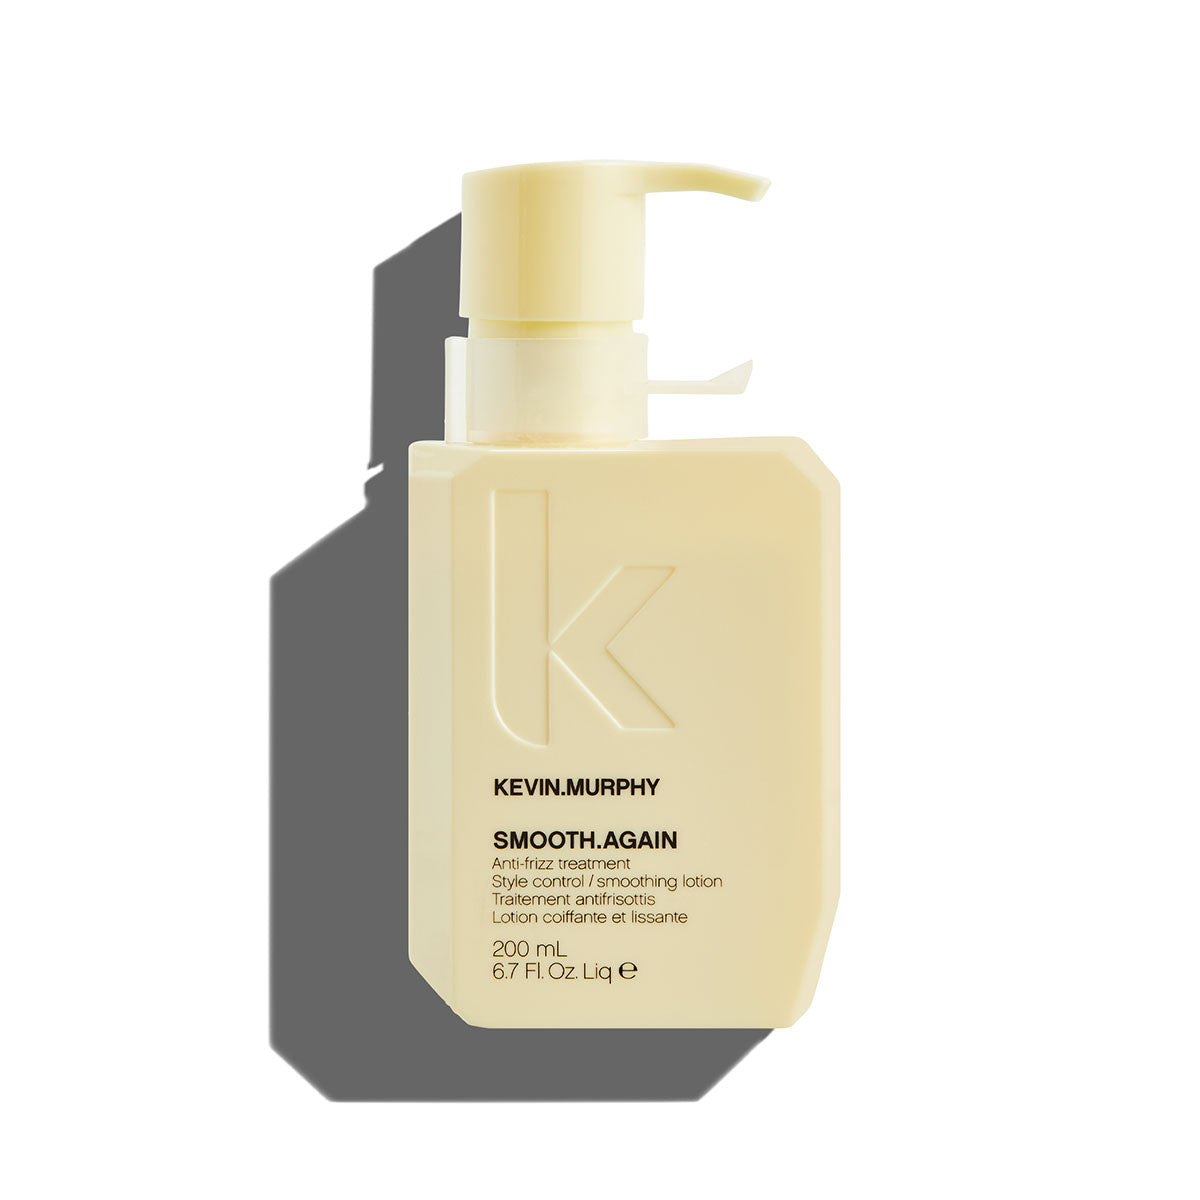 KEVIN.MURPHY Smooth Again 200ml